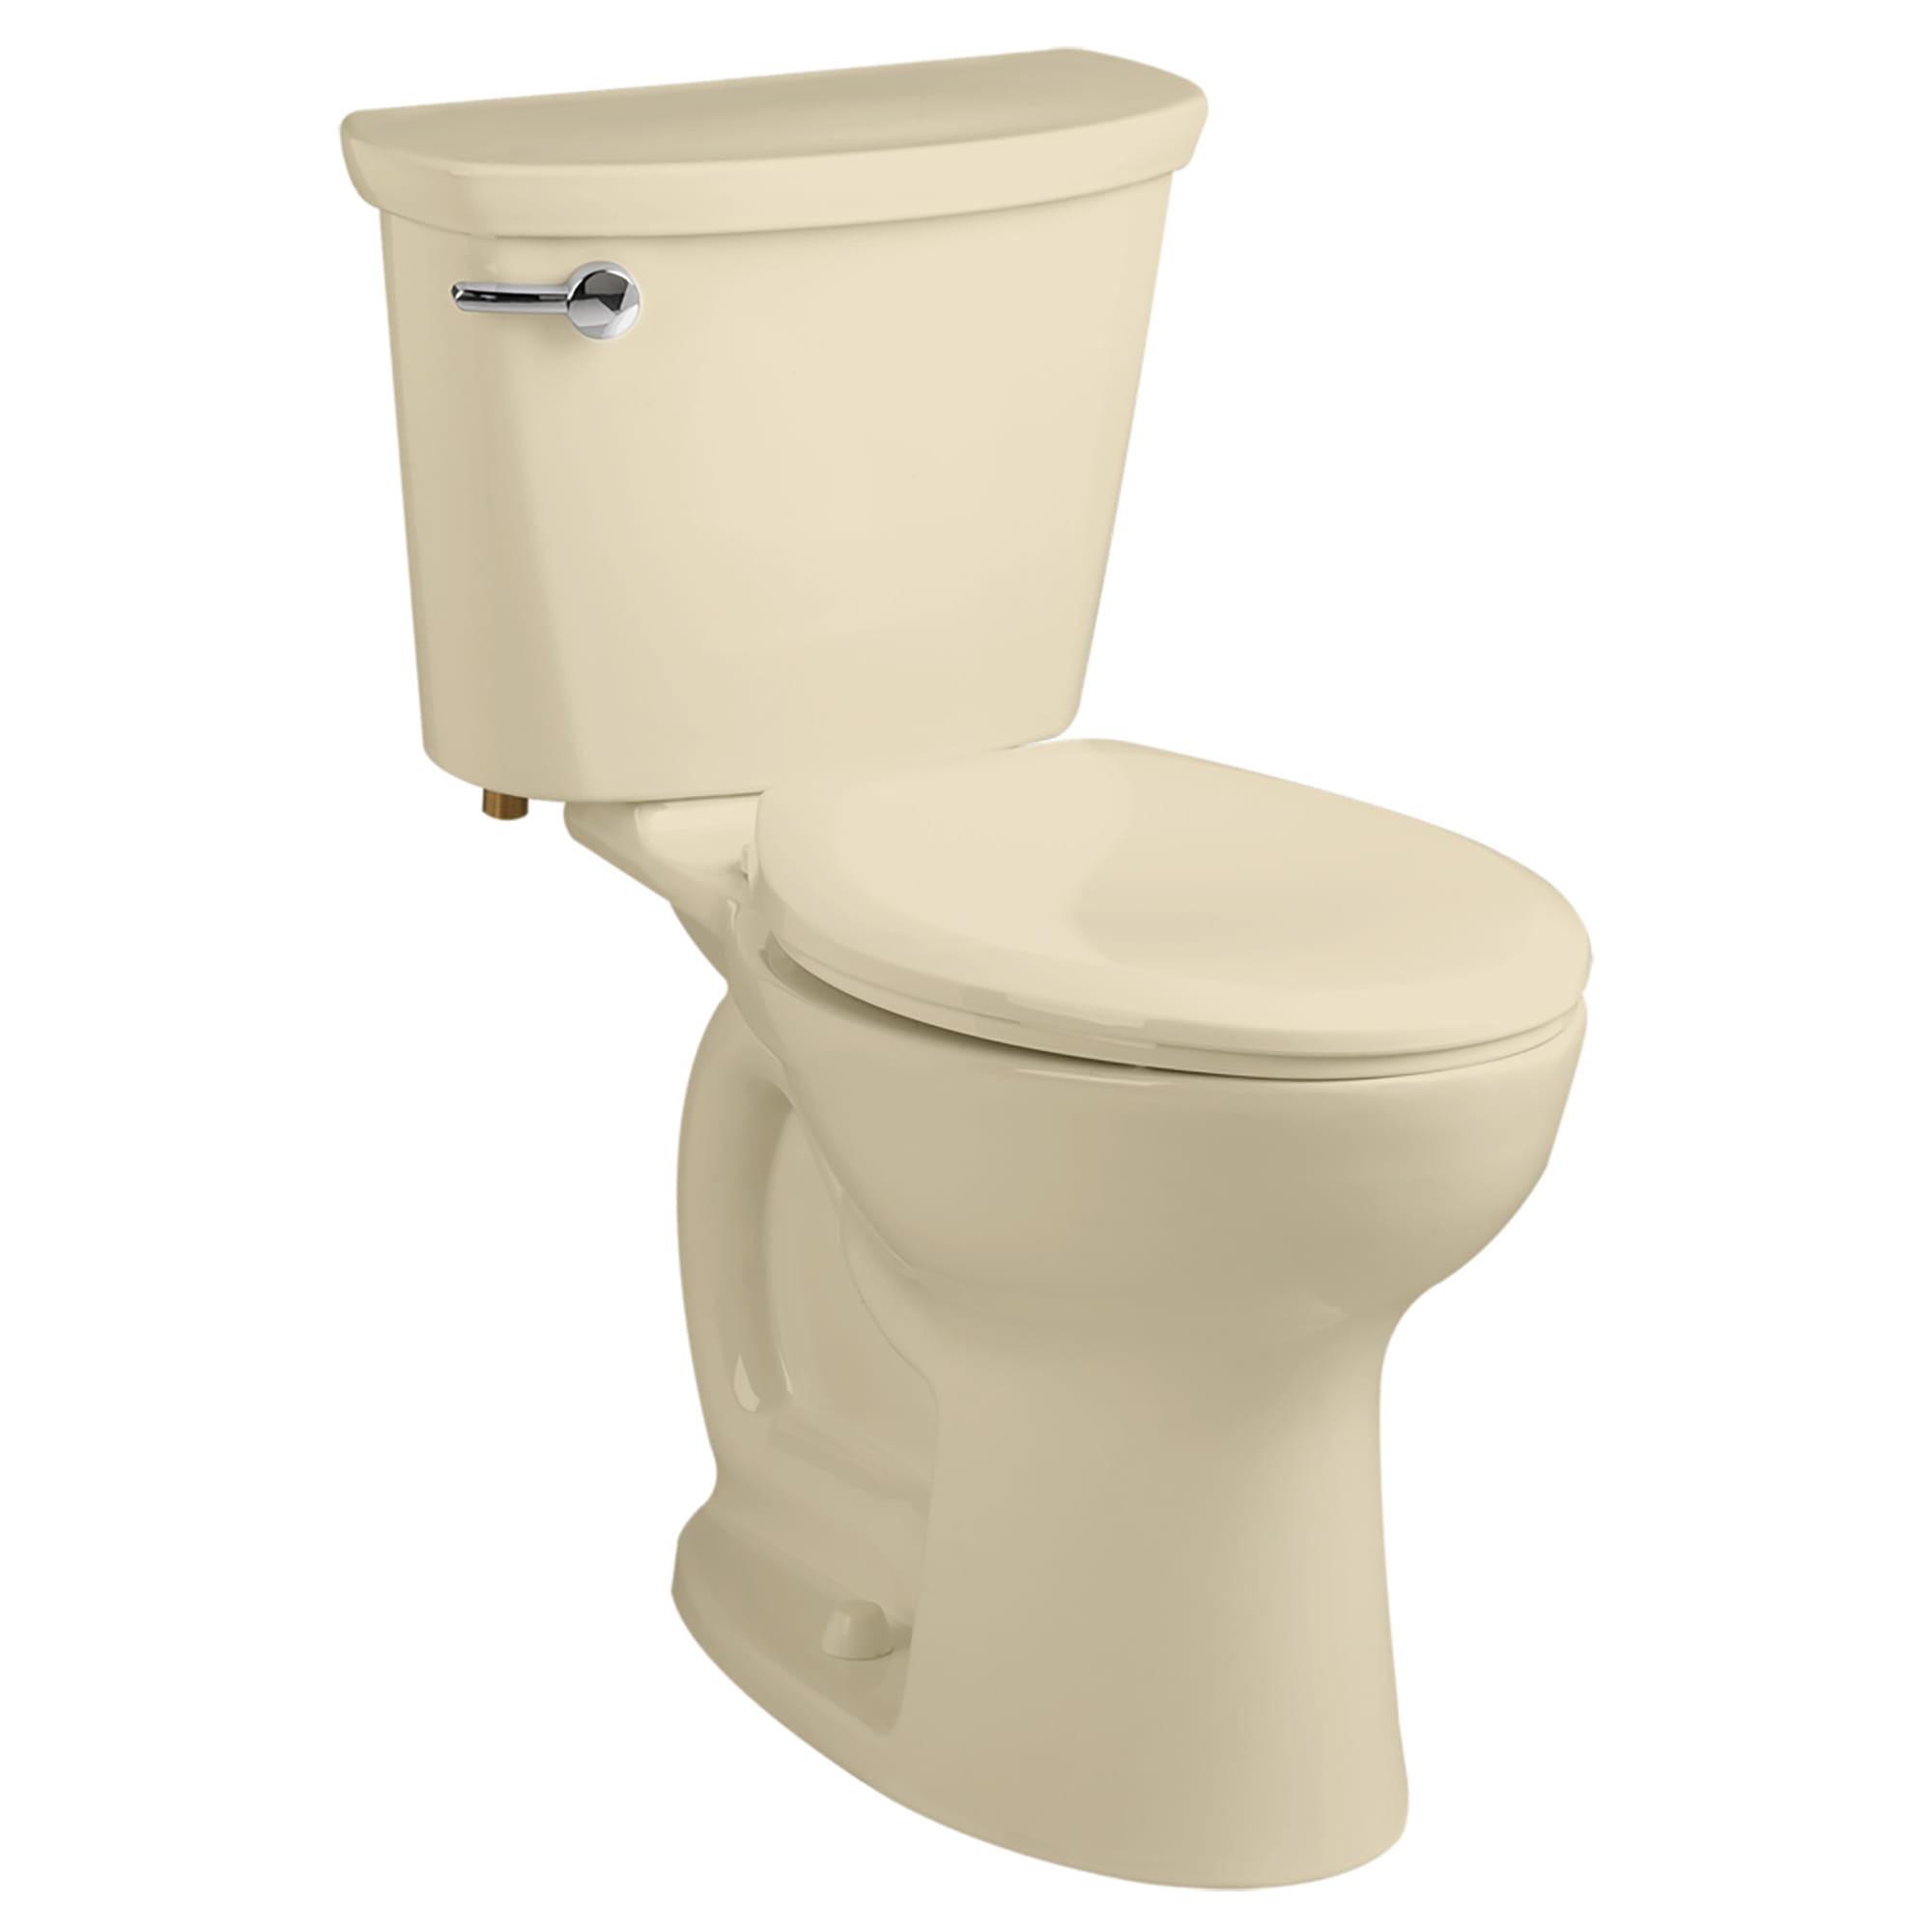 Cadet PRO Two Piece 16 gpf 60 Lpf Compact Chair Height Elongated 14 Inch Rough Toilet Less Seat BONE